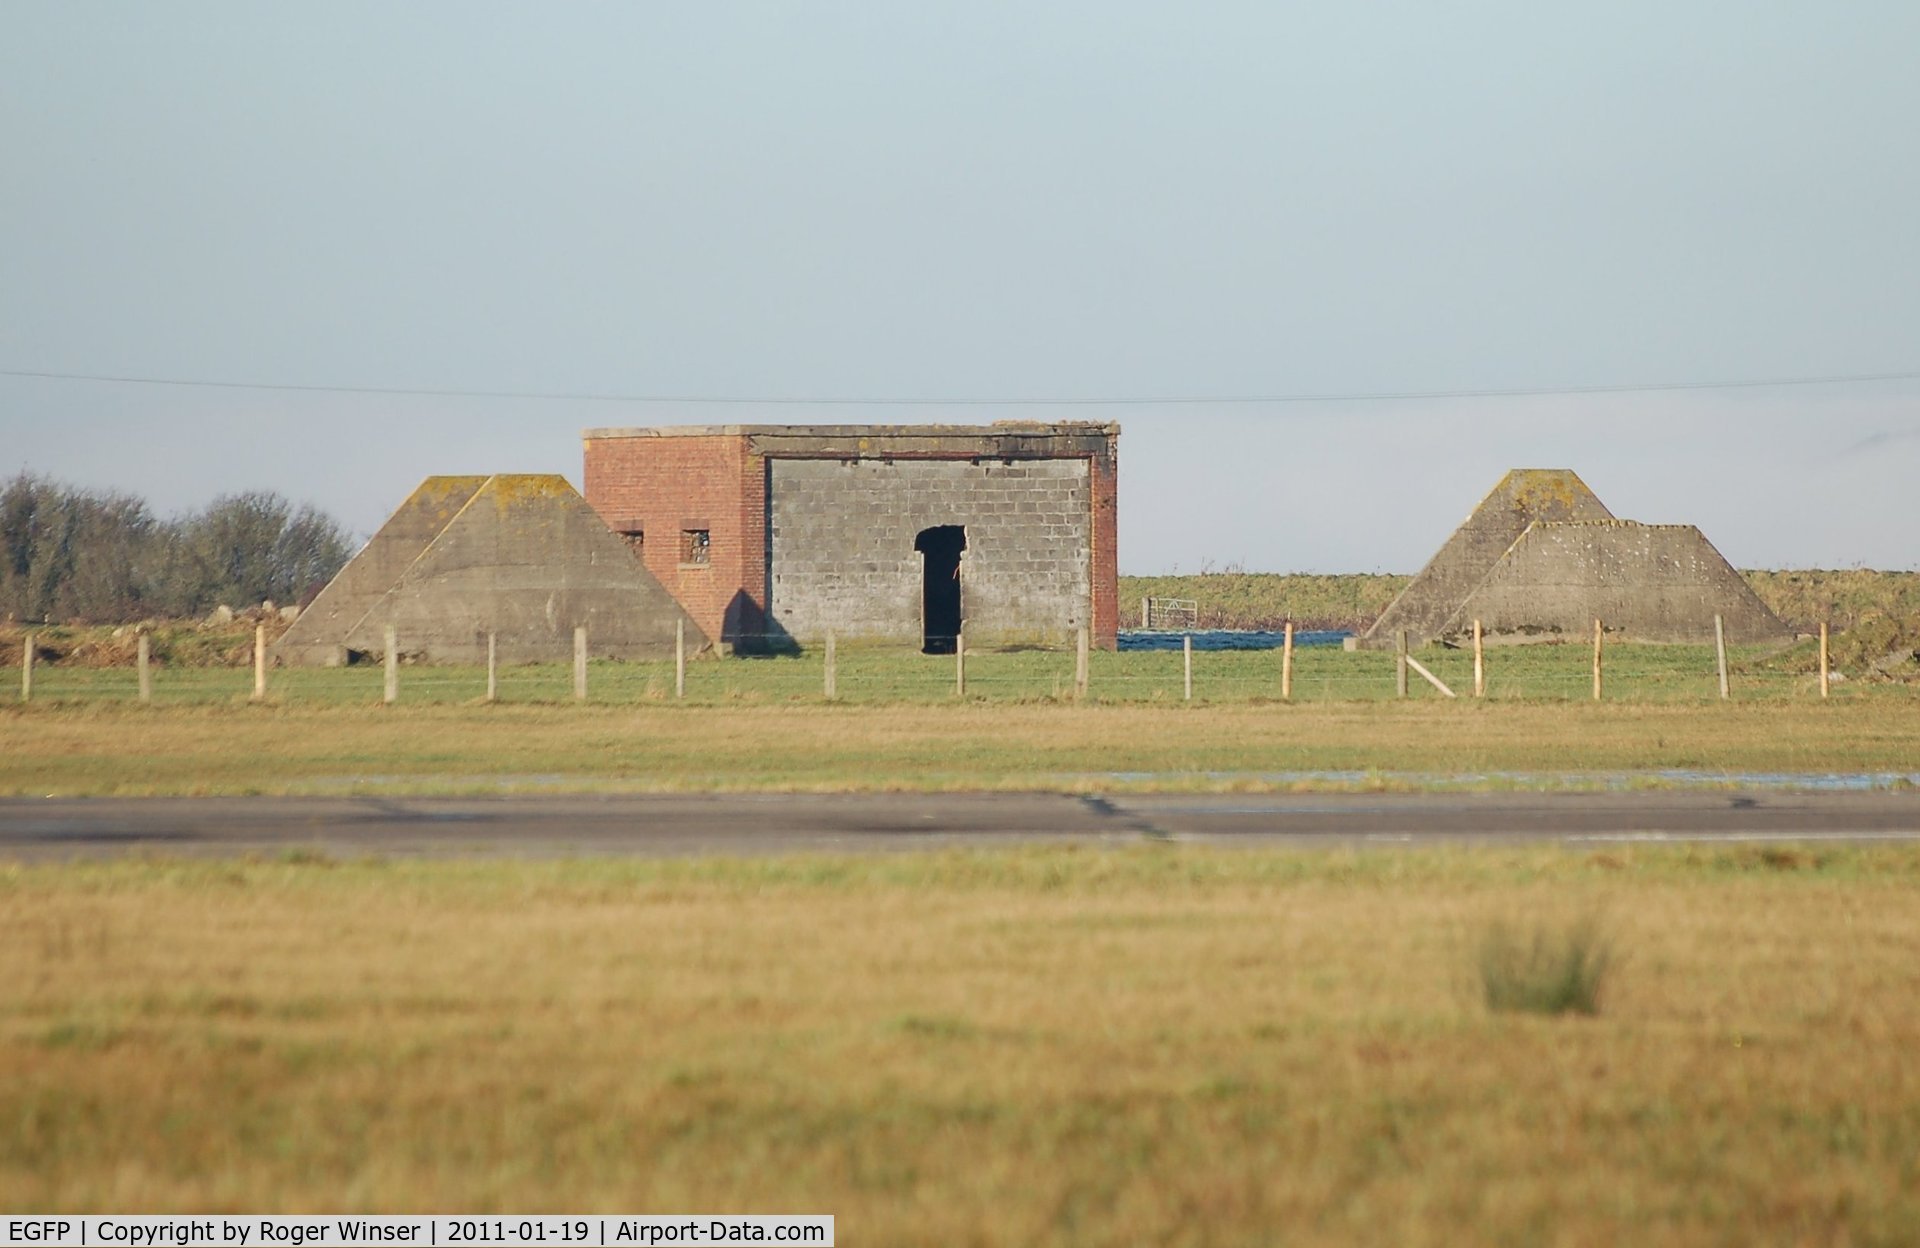 Pembrey Airport, Pembrey, Wales United Kingdom (EGFP) - Remains of the 1940's bomb store on the former RAF Station Pembrey airfield site.